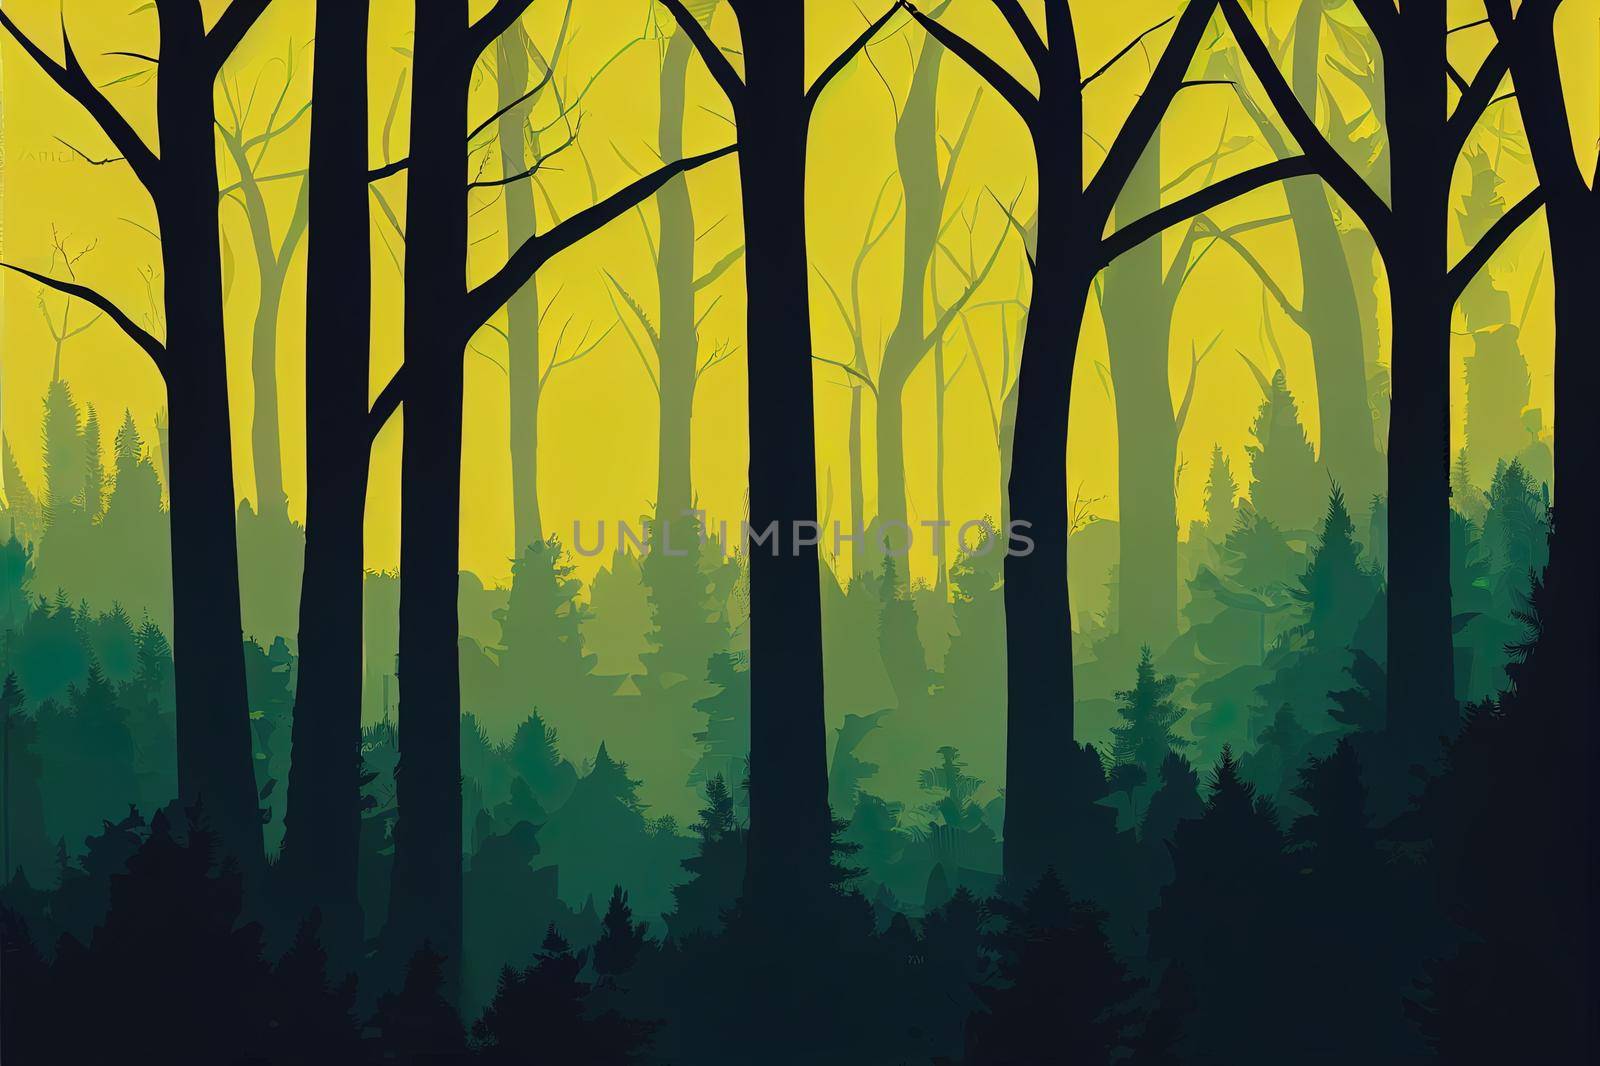 Abstract forest silhouette nature, landscape illustration by 2ragon